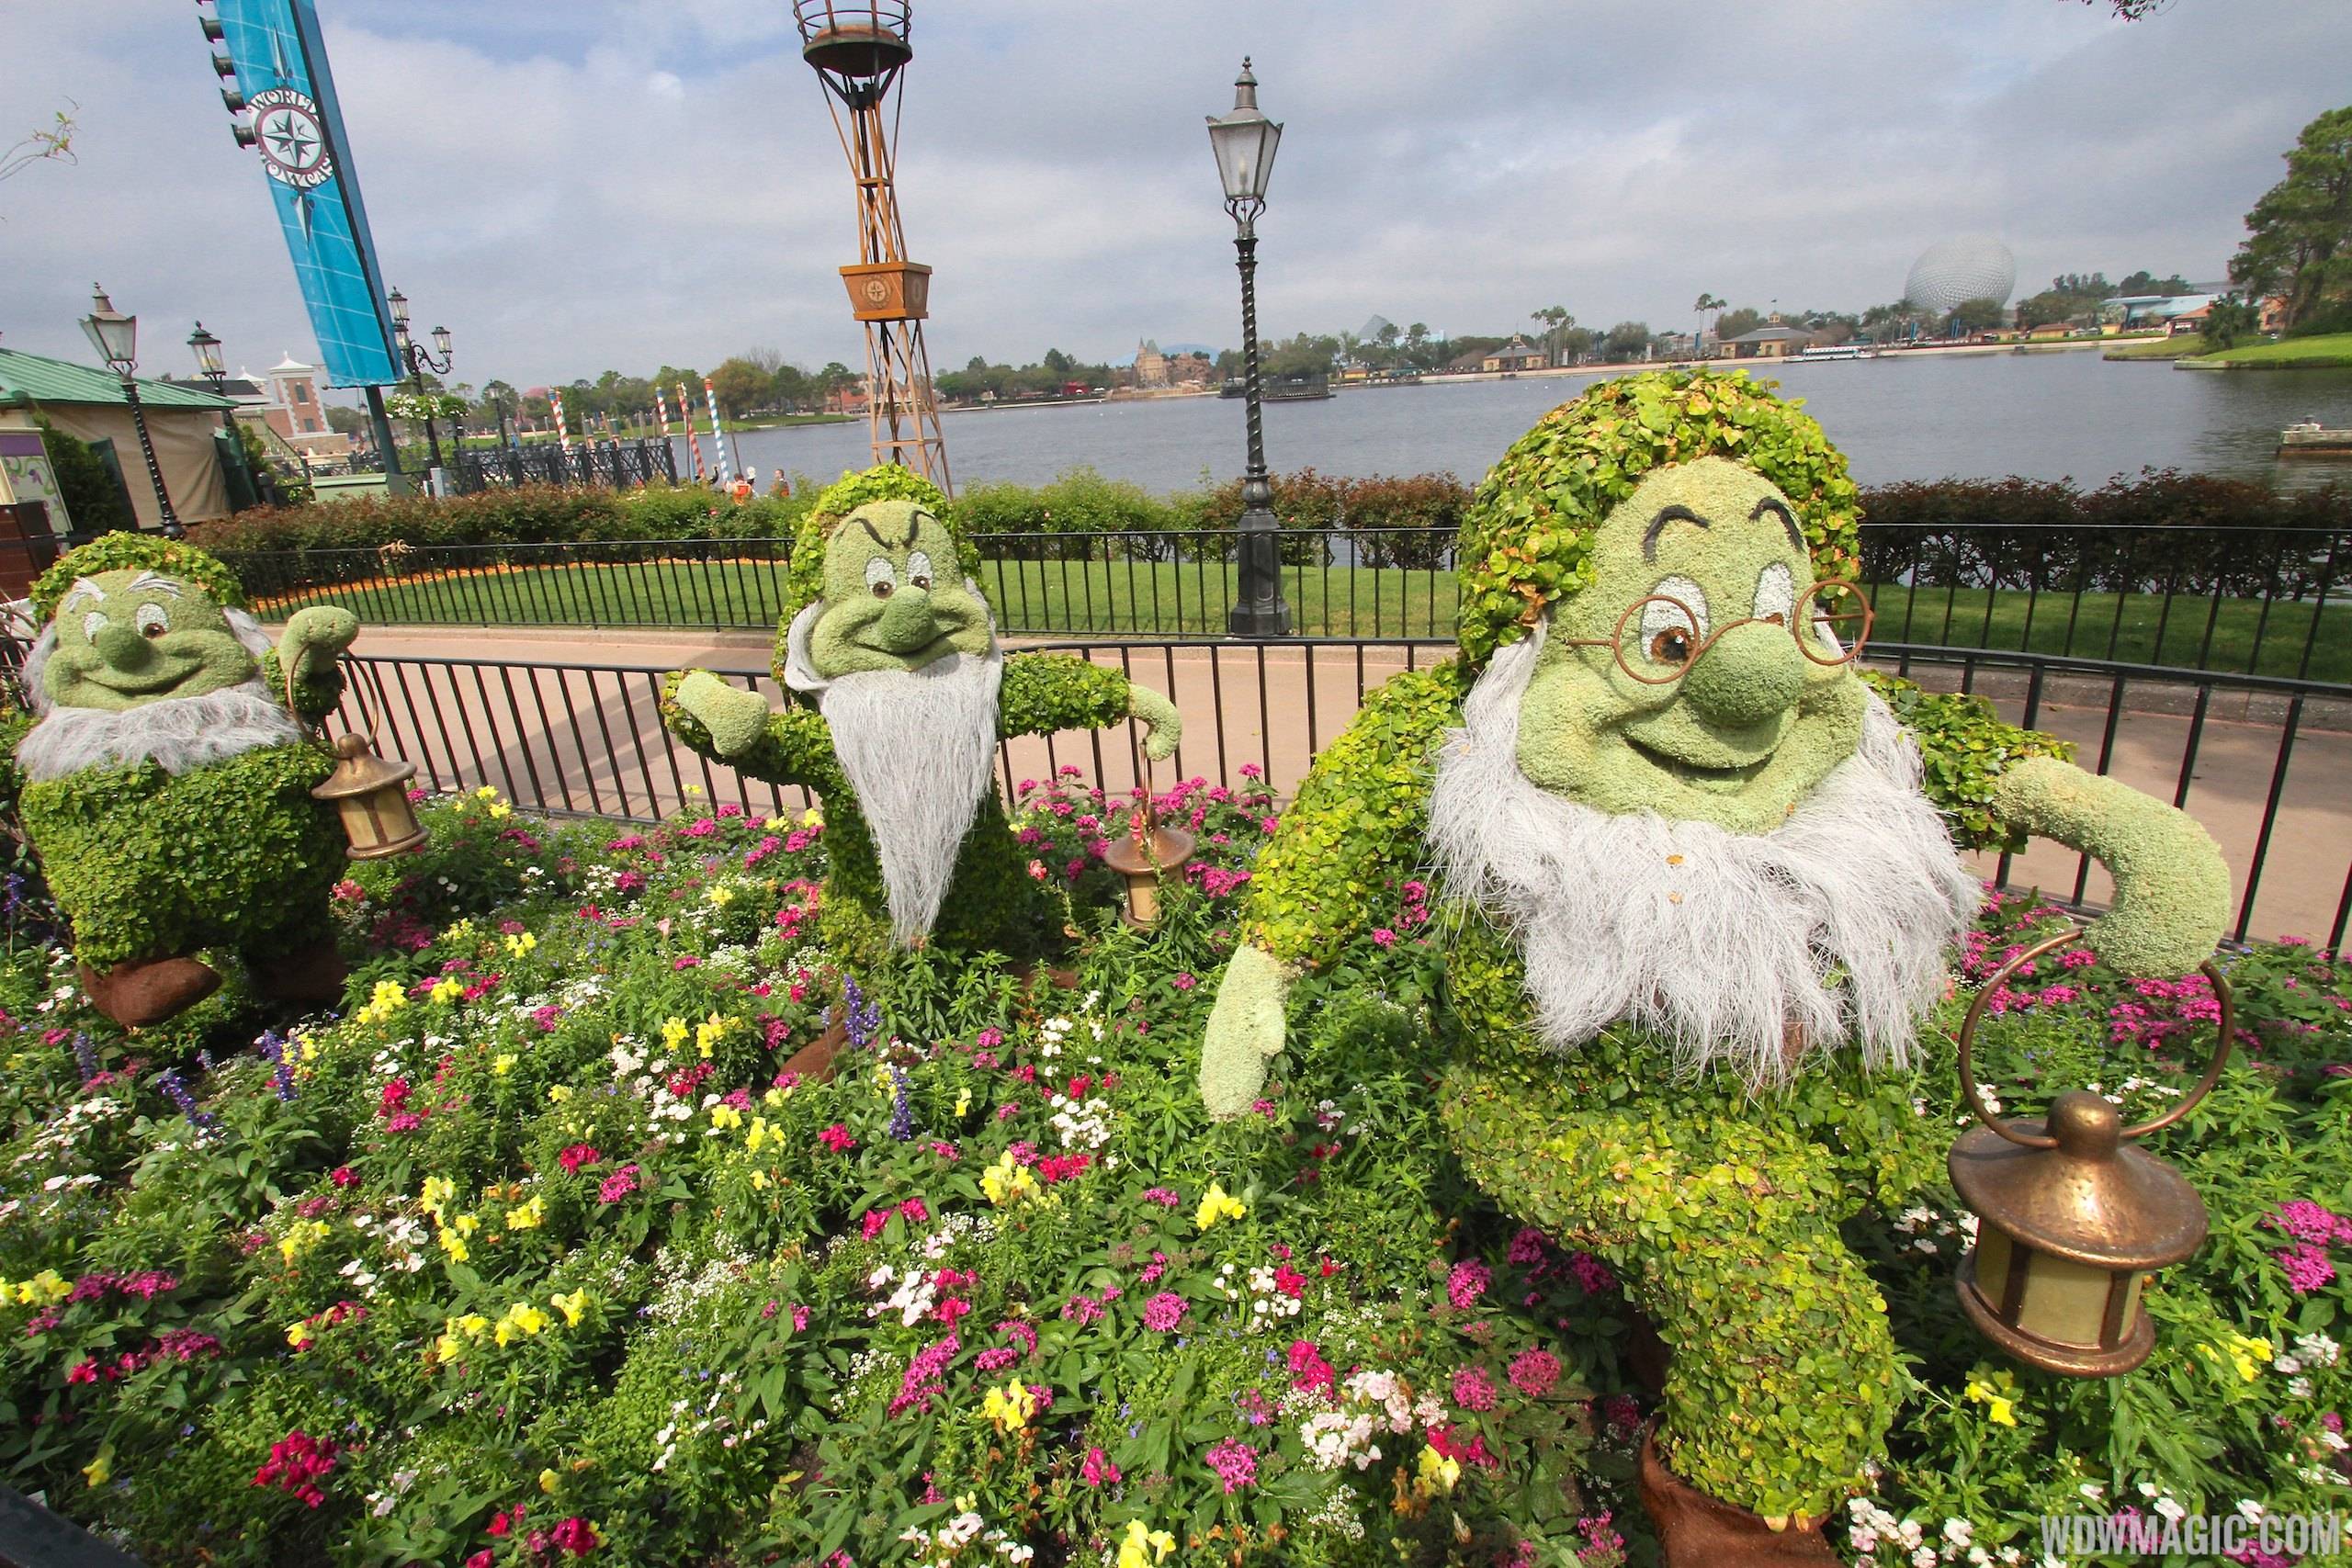 2014 Epcot Flower and Garden Festival - Snow White and the Seven Dwarfs topiary